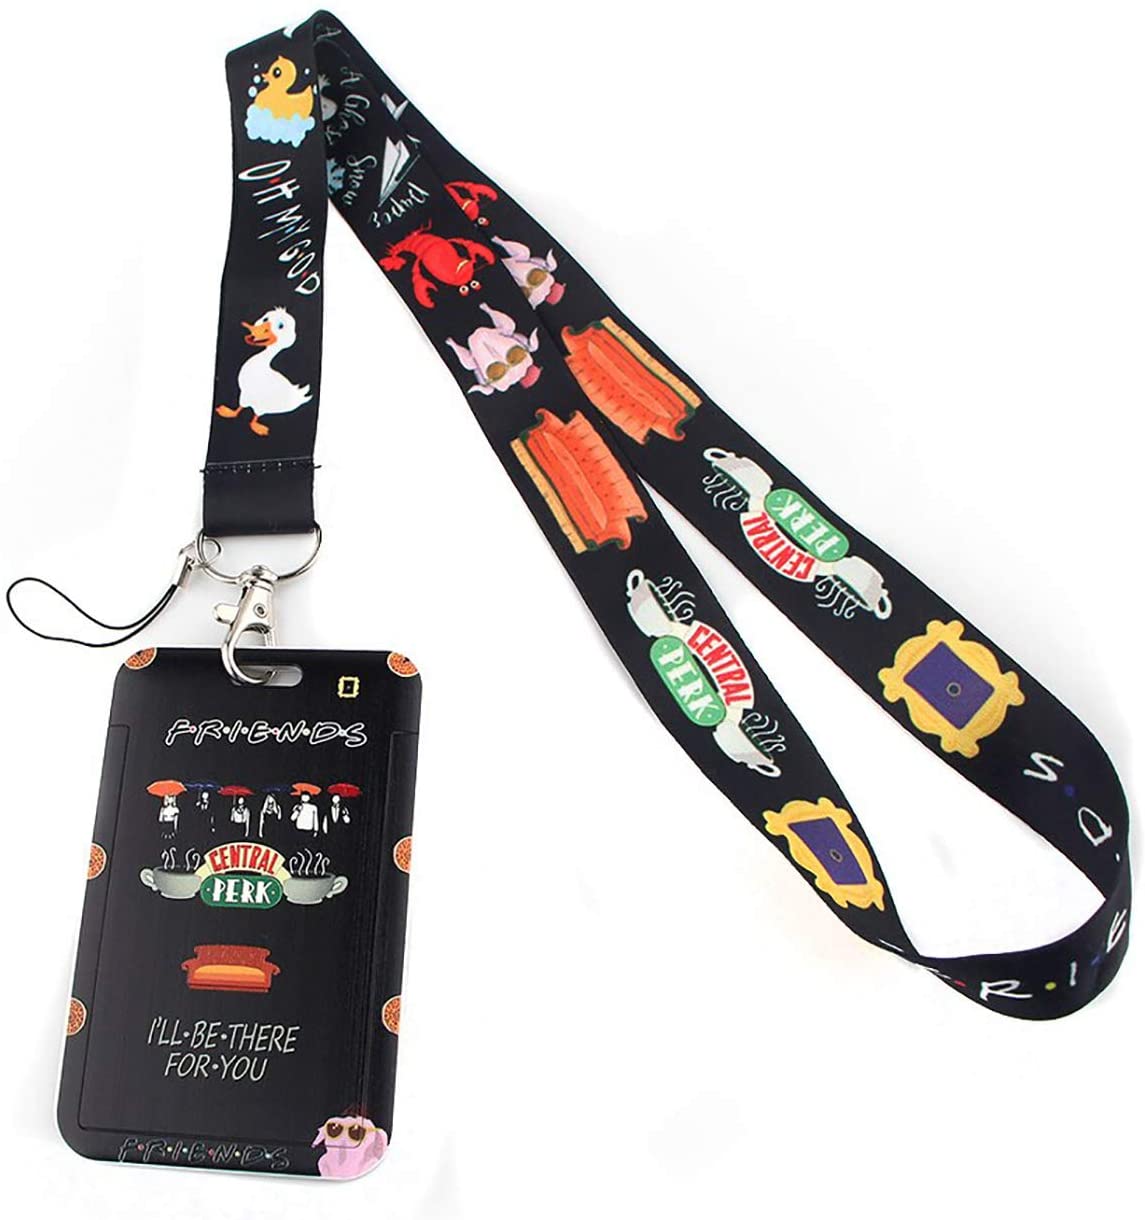 Lanyard Keychain and ID Holder with Detachable, Breakaway Buckle for Keys or Badge | Durable Black Nylon | Hilarious Novelty Necklace 9 Styles Funny Lanyard